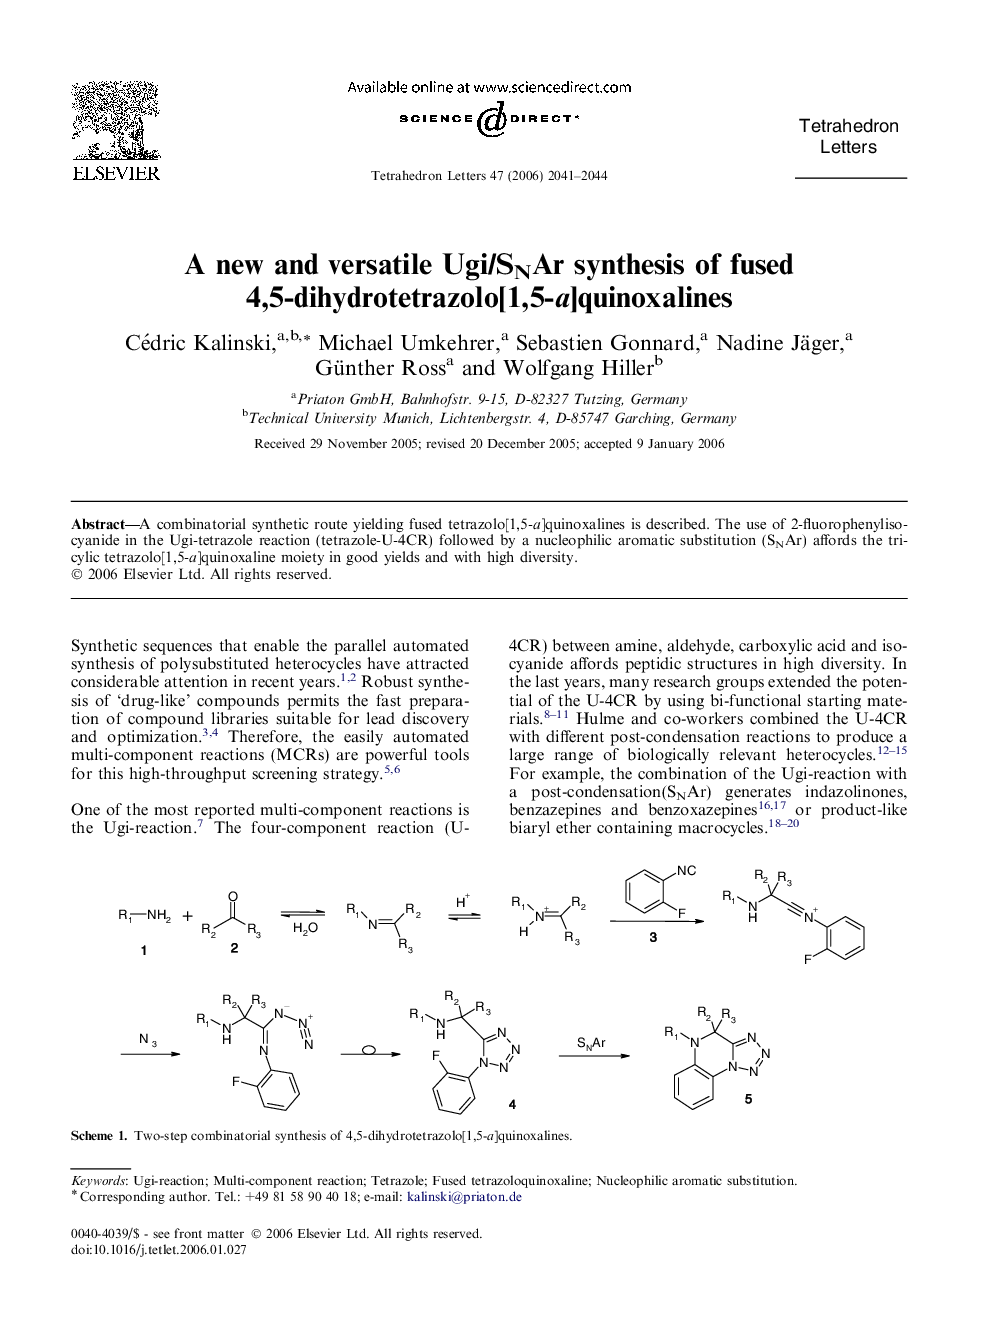 A new and versatile Ugi/SNAr synthesis of fused 4,5-dihydrotetrazolo[1,5-a]quinoxalines